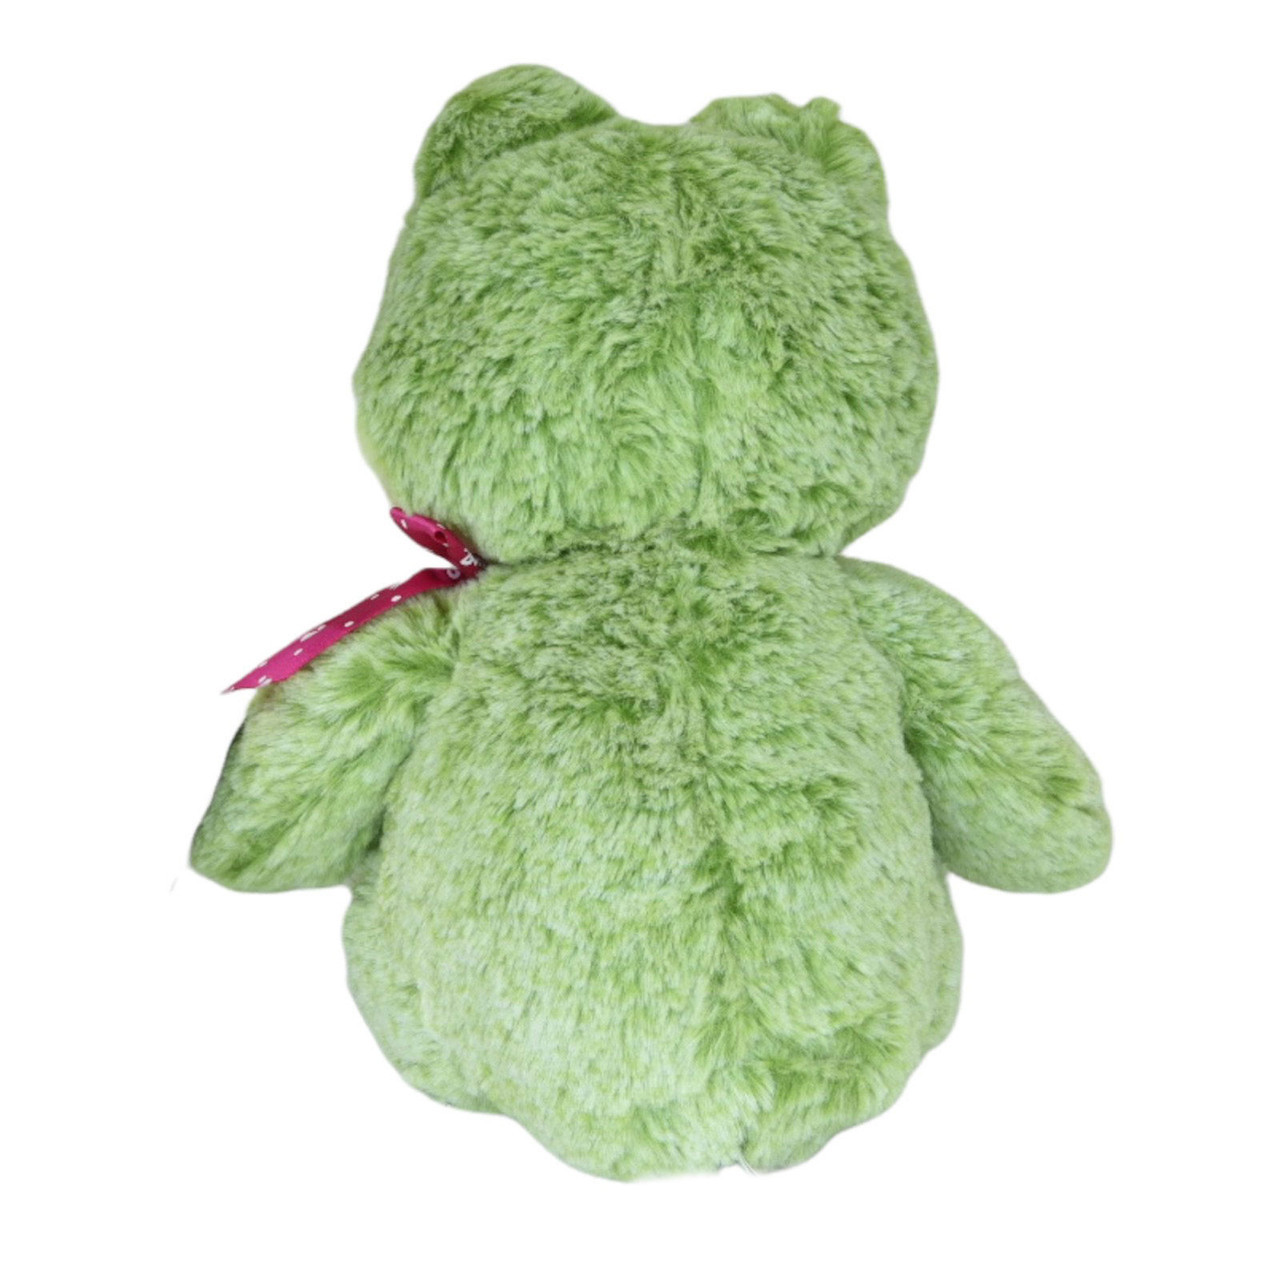 https://cdn11.bigcommerce.com/s-mhr53lwccw/images/stencil/1280x1280/products/1206/8412/kellytoy-stuffed-animal-plush-frog-with-valentine-ribbon-10-inch-back__45432.1663975690.jpg?c=1?imbypass=on